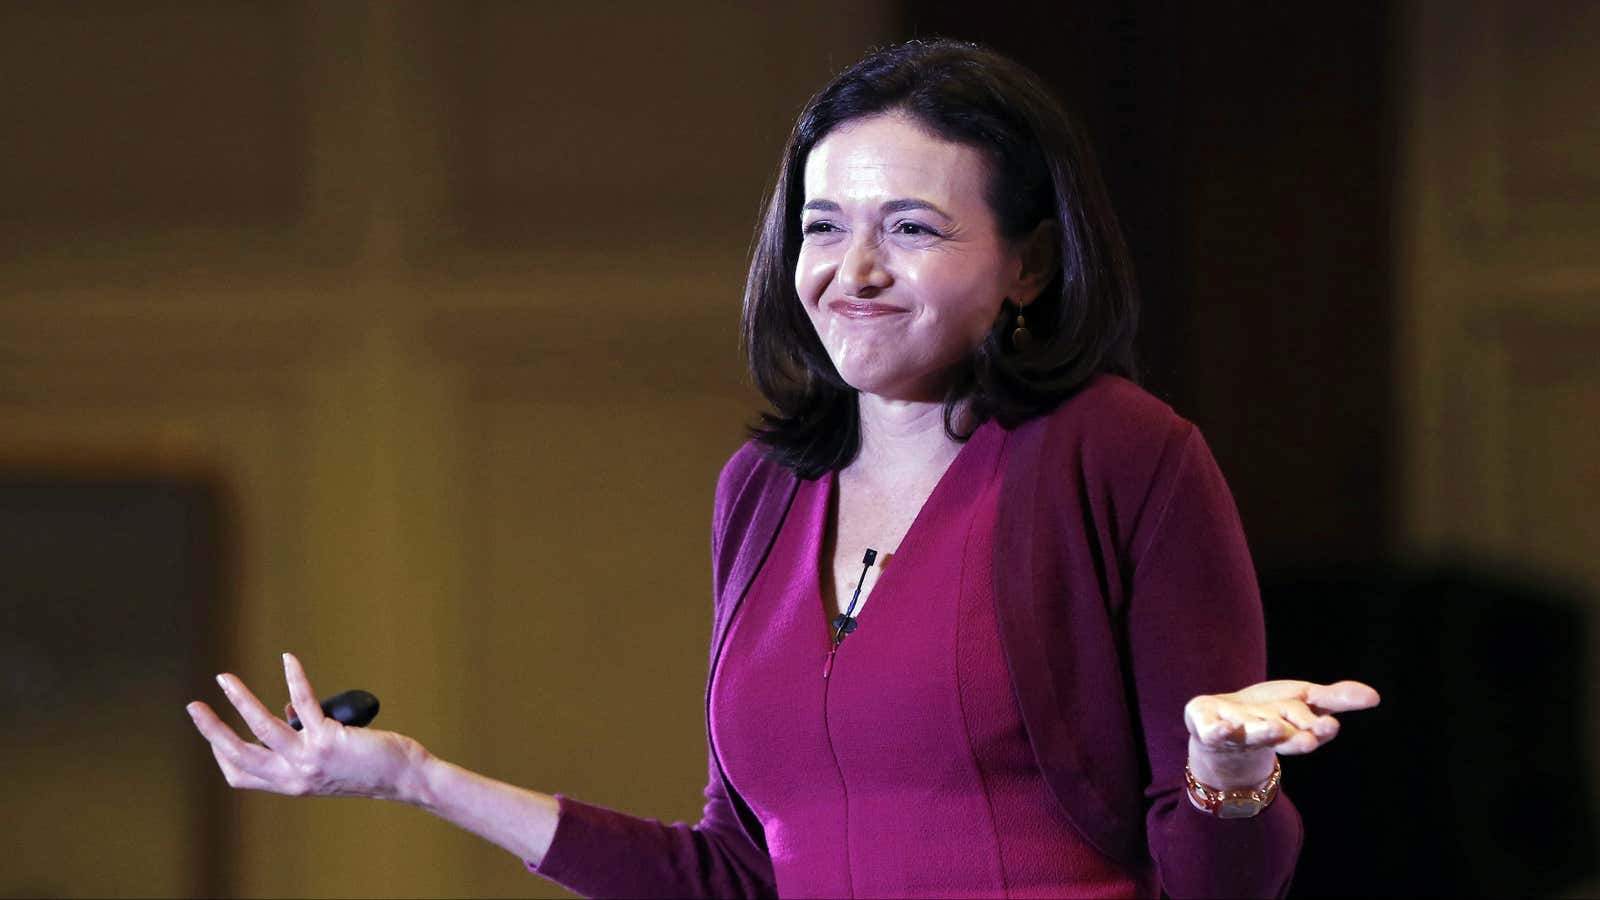 Facebook COO Sheryl Sandberg has said, “There are still days when I wake up feeling like a fraud.”